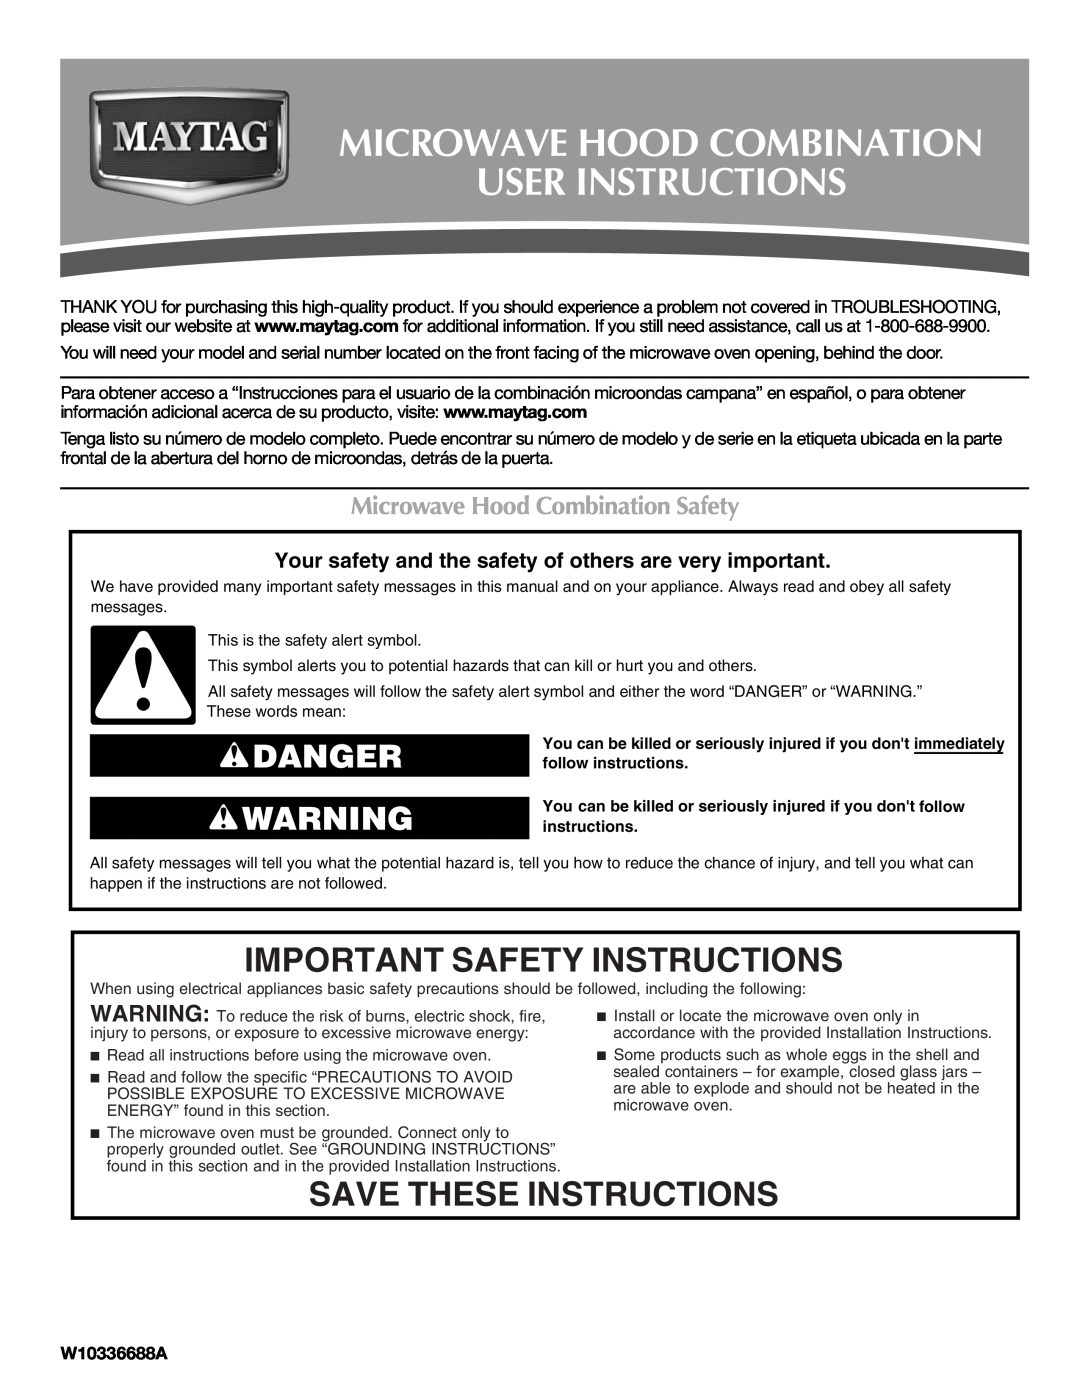 Maytag W10336688A important safety instructions Important Safety Instructions, Save These Instructions, Danger 